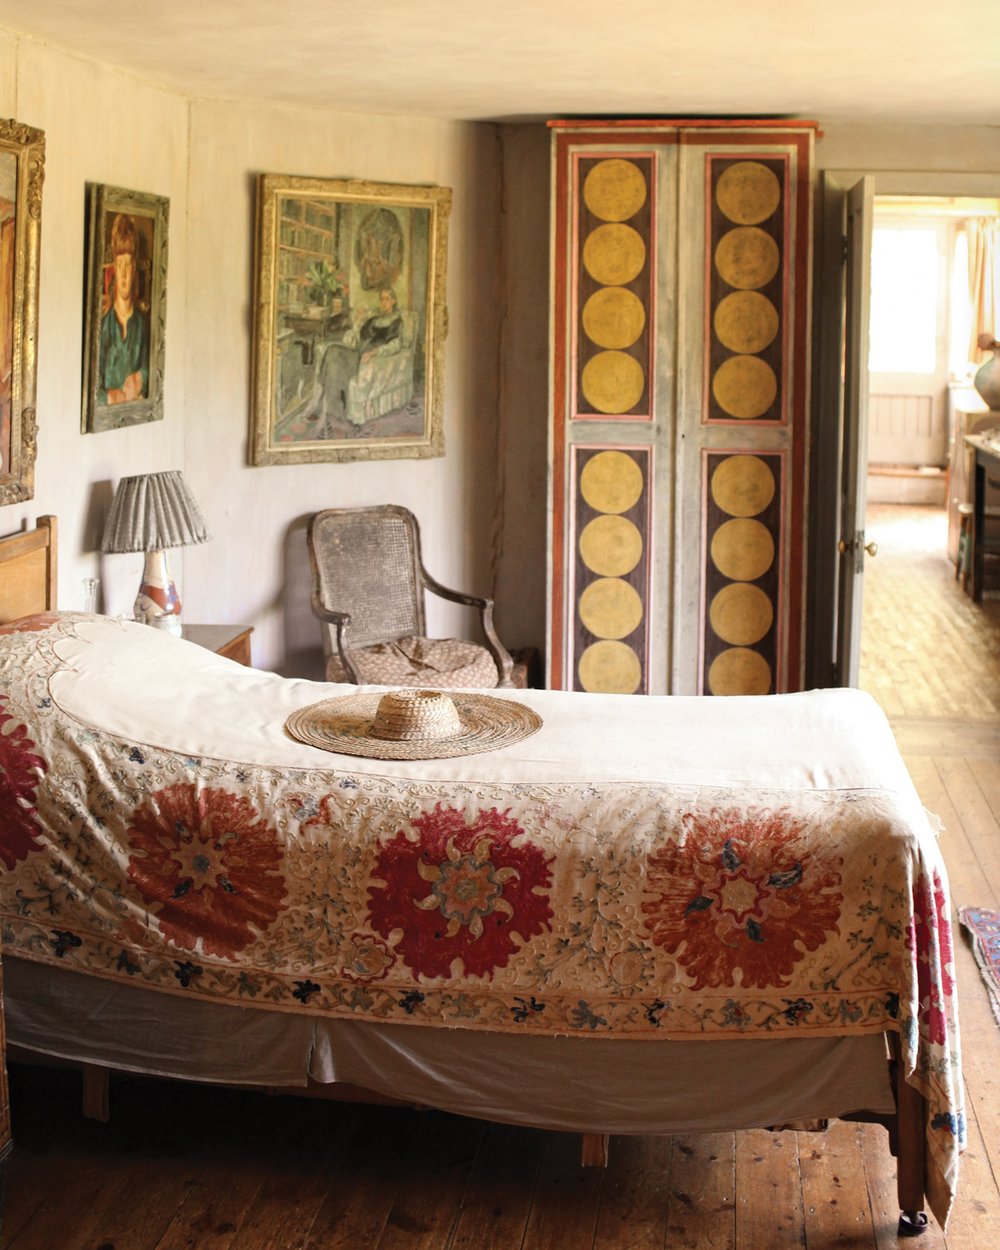 A bedroom at Charleston in Bloomsbury country.